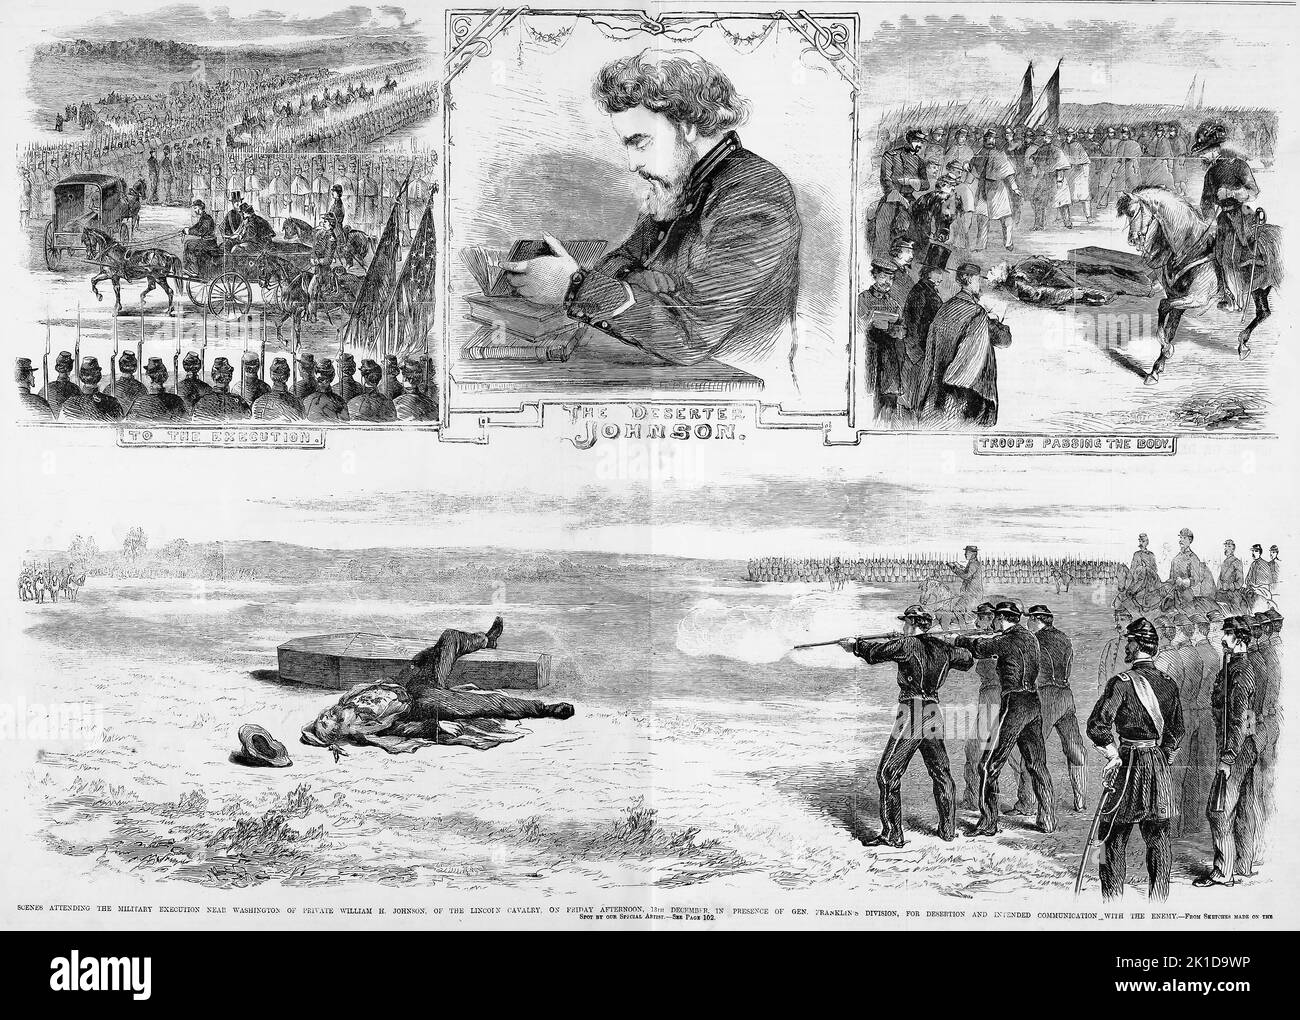 Scenes attending the military execution near Washington, D. C., of private William Henry Johnson, of the Lincoln Cavalry, on December 13th, 1861, in presence of General William Buel Franklin's division, for desertion and intended communication with the enemy. First execution of a deserter in the Army of the Potomac. 19th century American Civil War illustration from Frank Leslie's Illustrated Newspaper Stock Photo